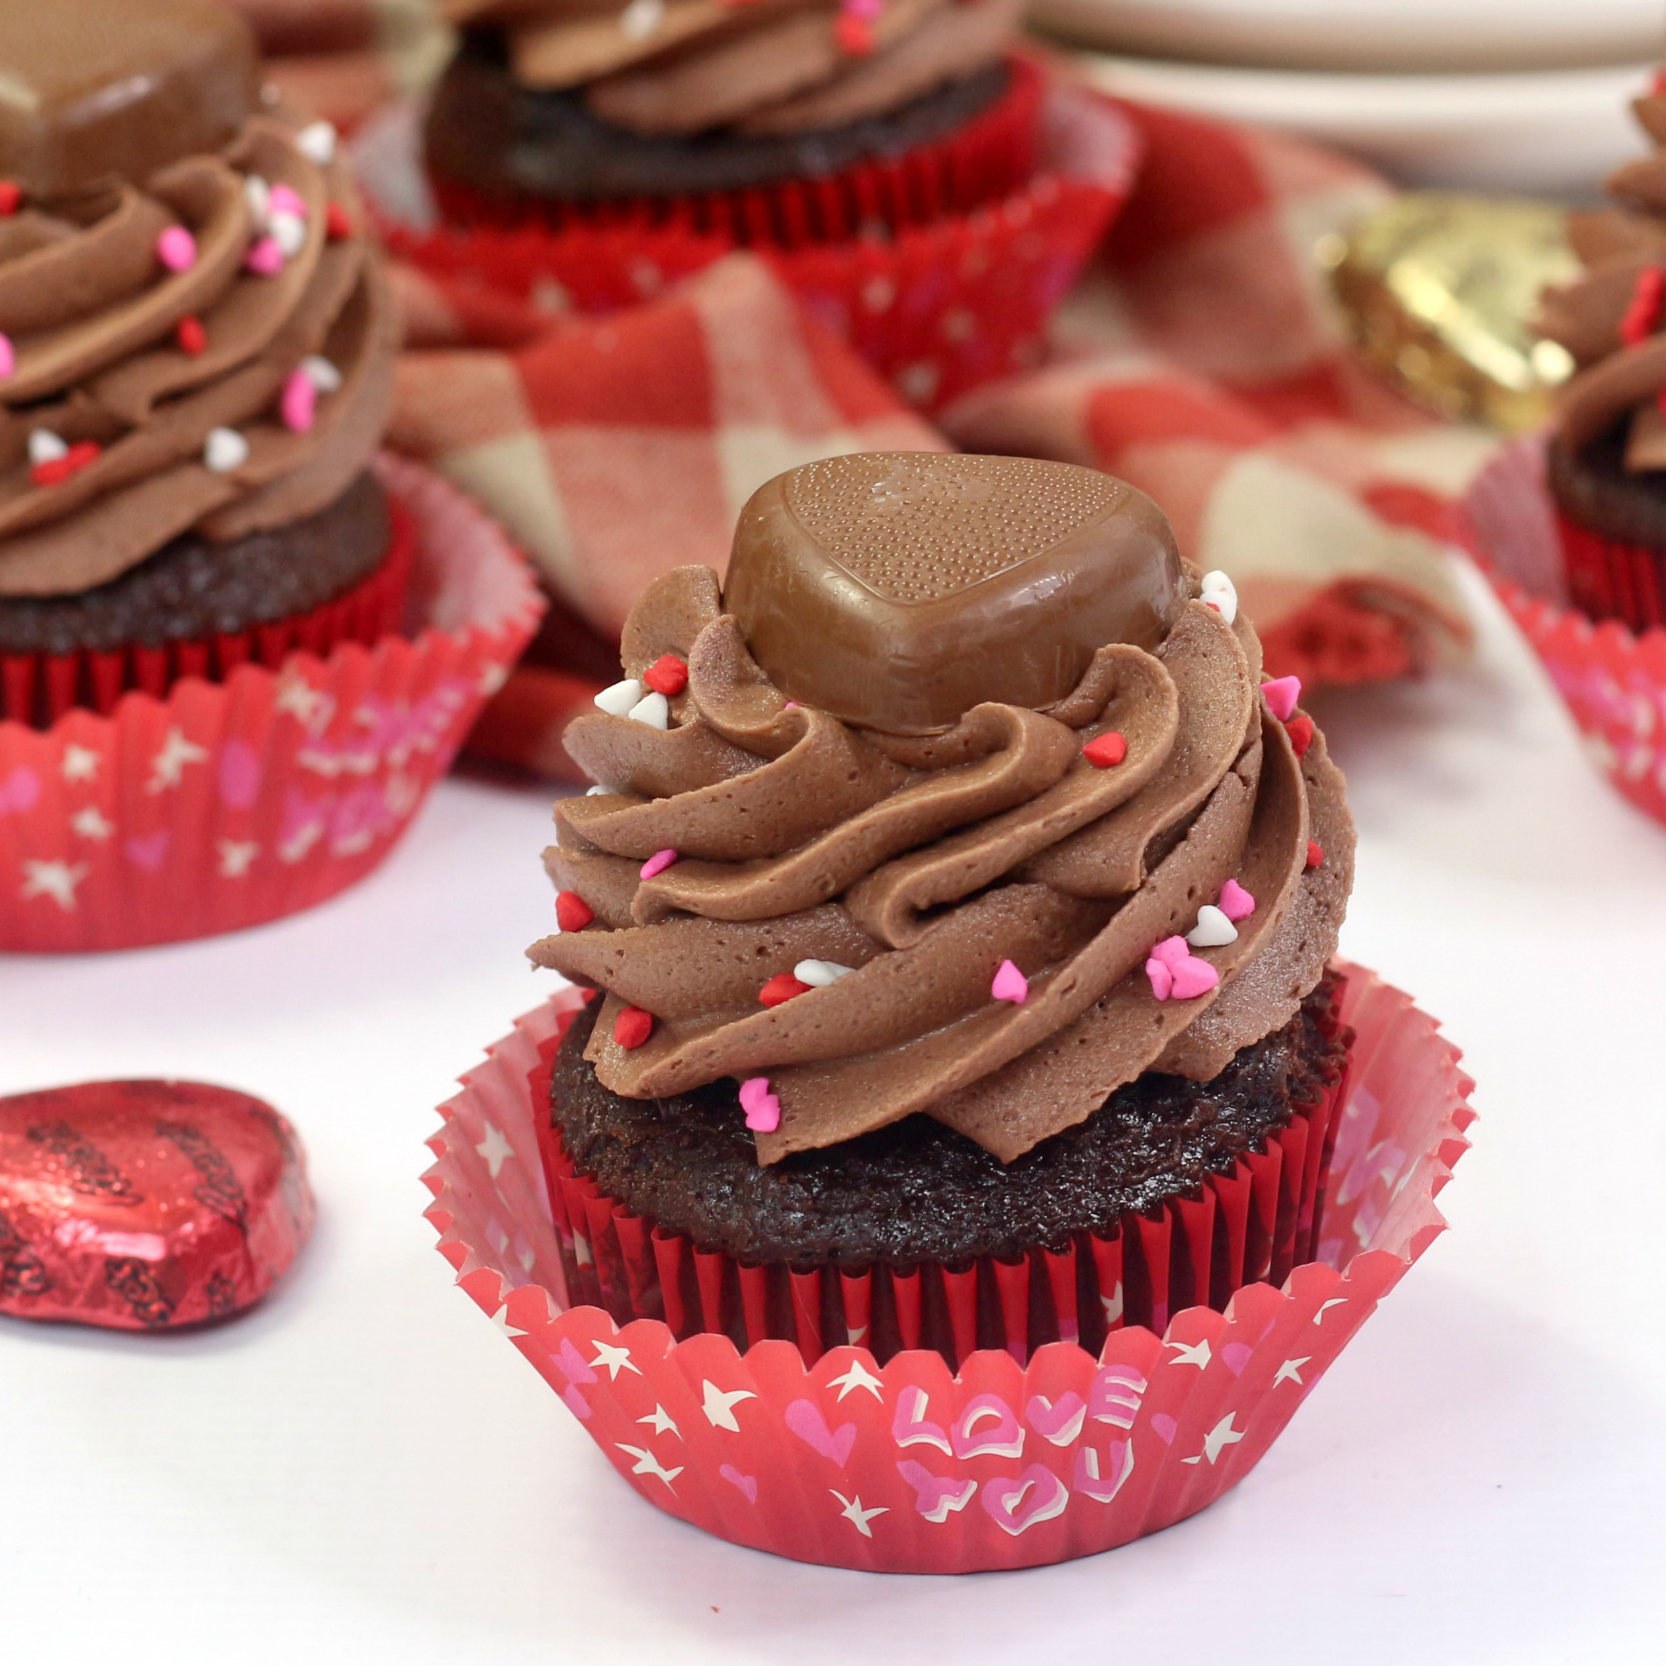 Valentines Day Chocolate cupcake with peanut butter chocolate frosting, heart shaped sprinkles, and a chocolate reeses treat on top.